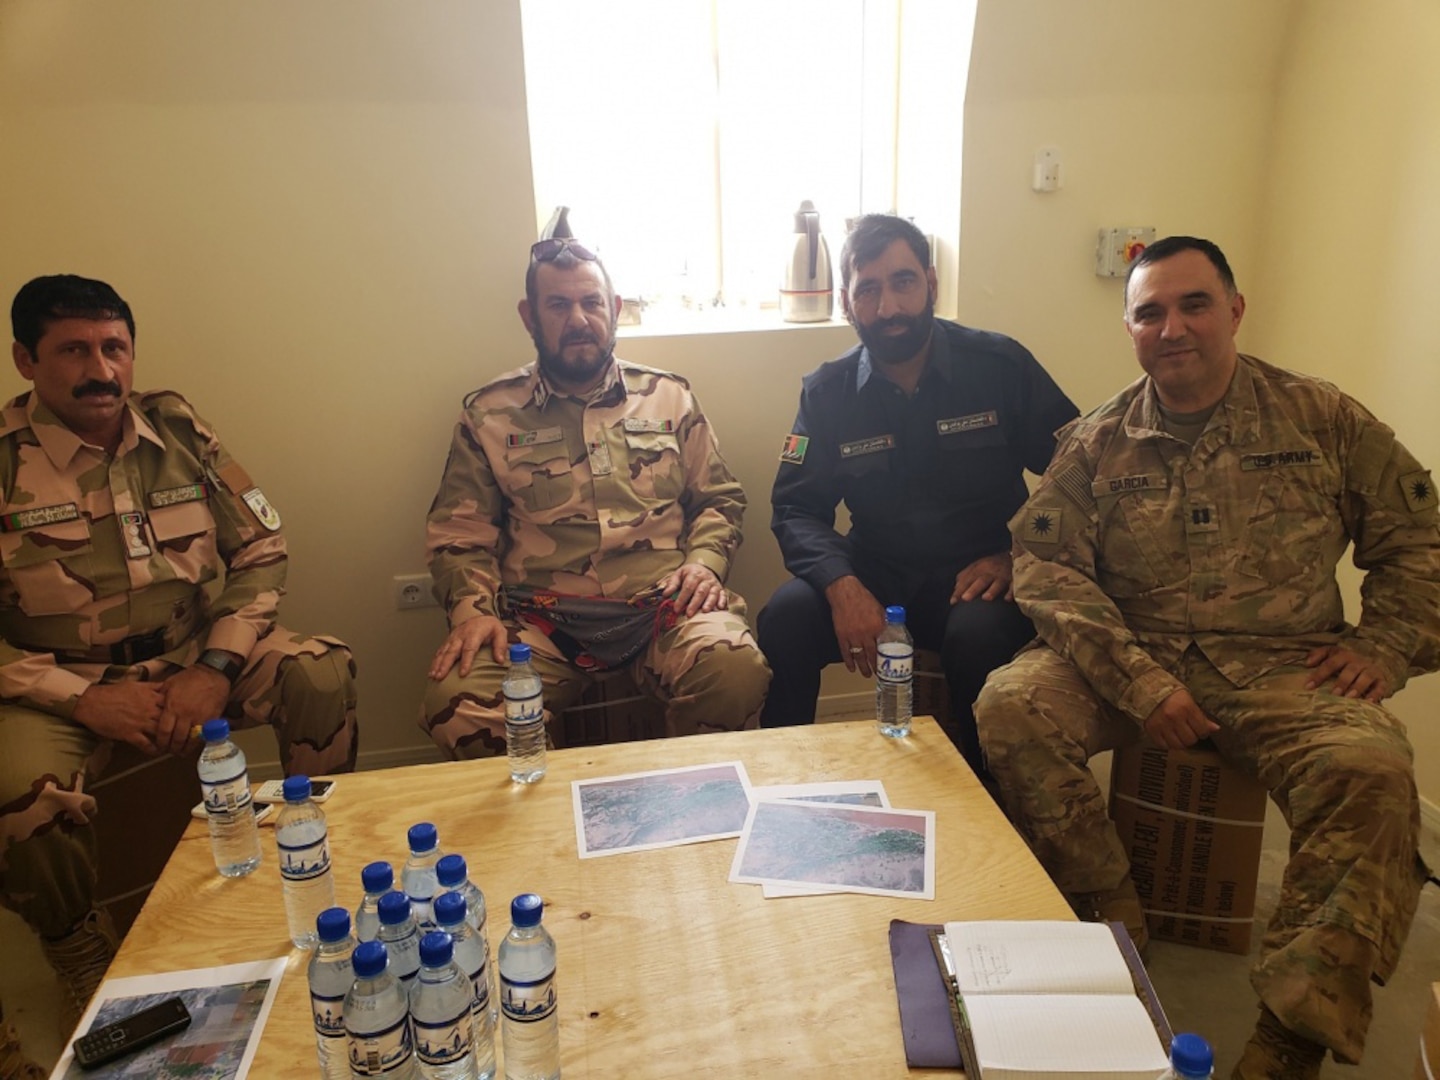 U.S. Army Capt. Vicente Garcia, far right, poses for a group photo with three district chiefs of police during an expeditionary advisory package at Zharay Province in Afghanistan, held on Aug. 8, 2018.